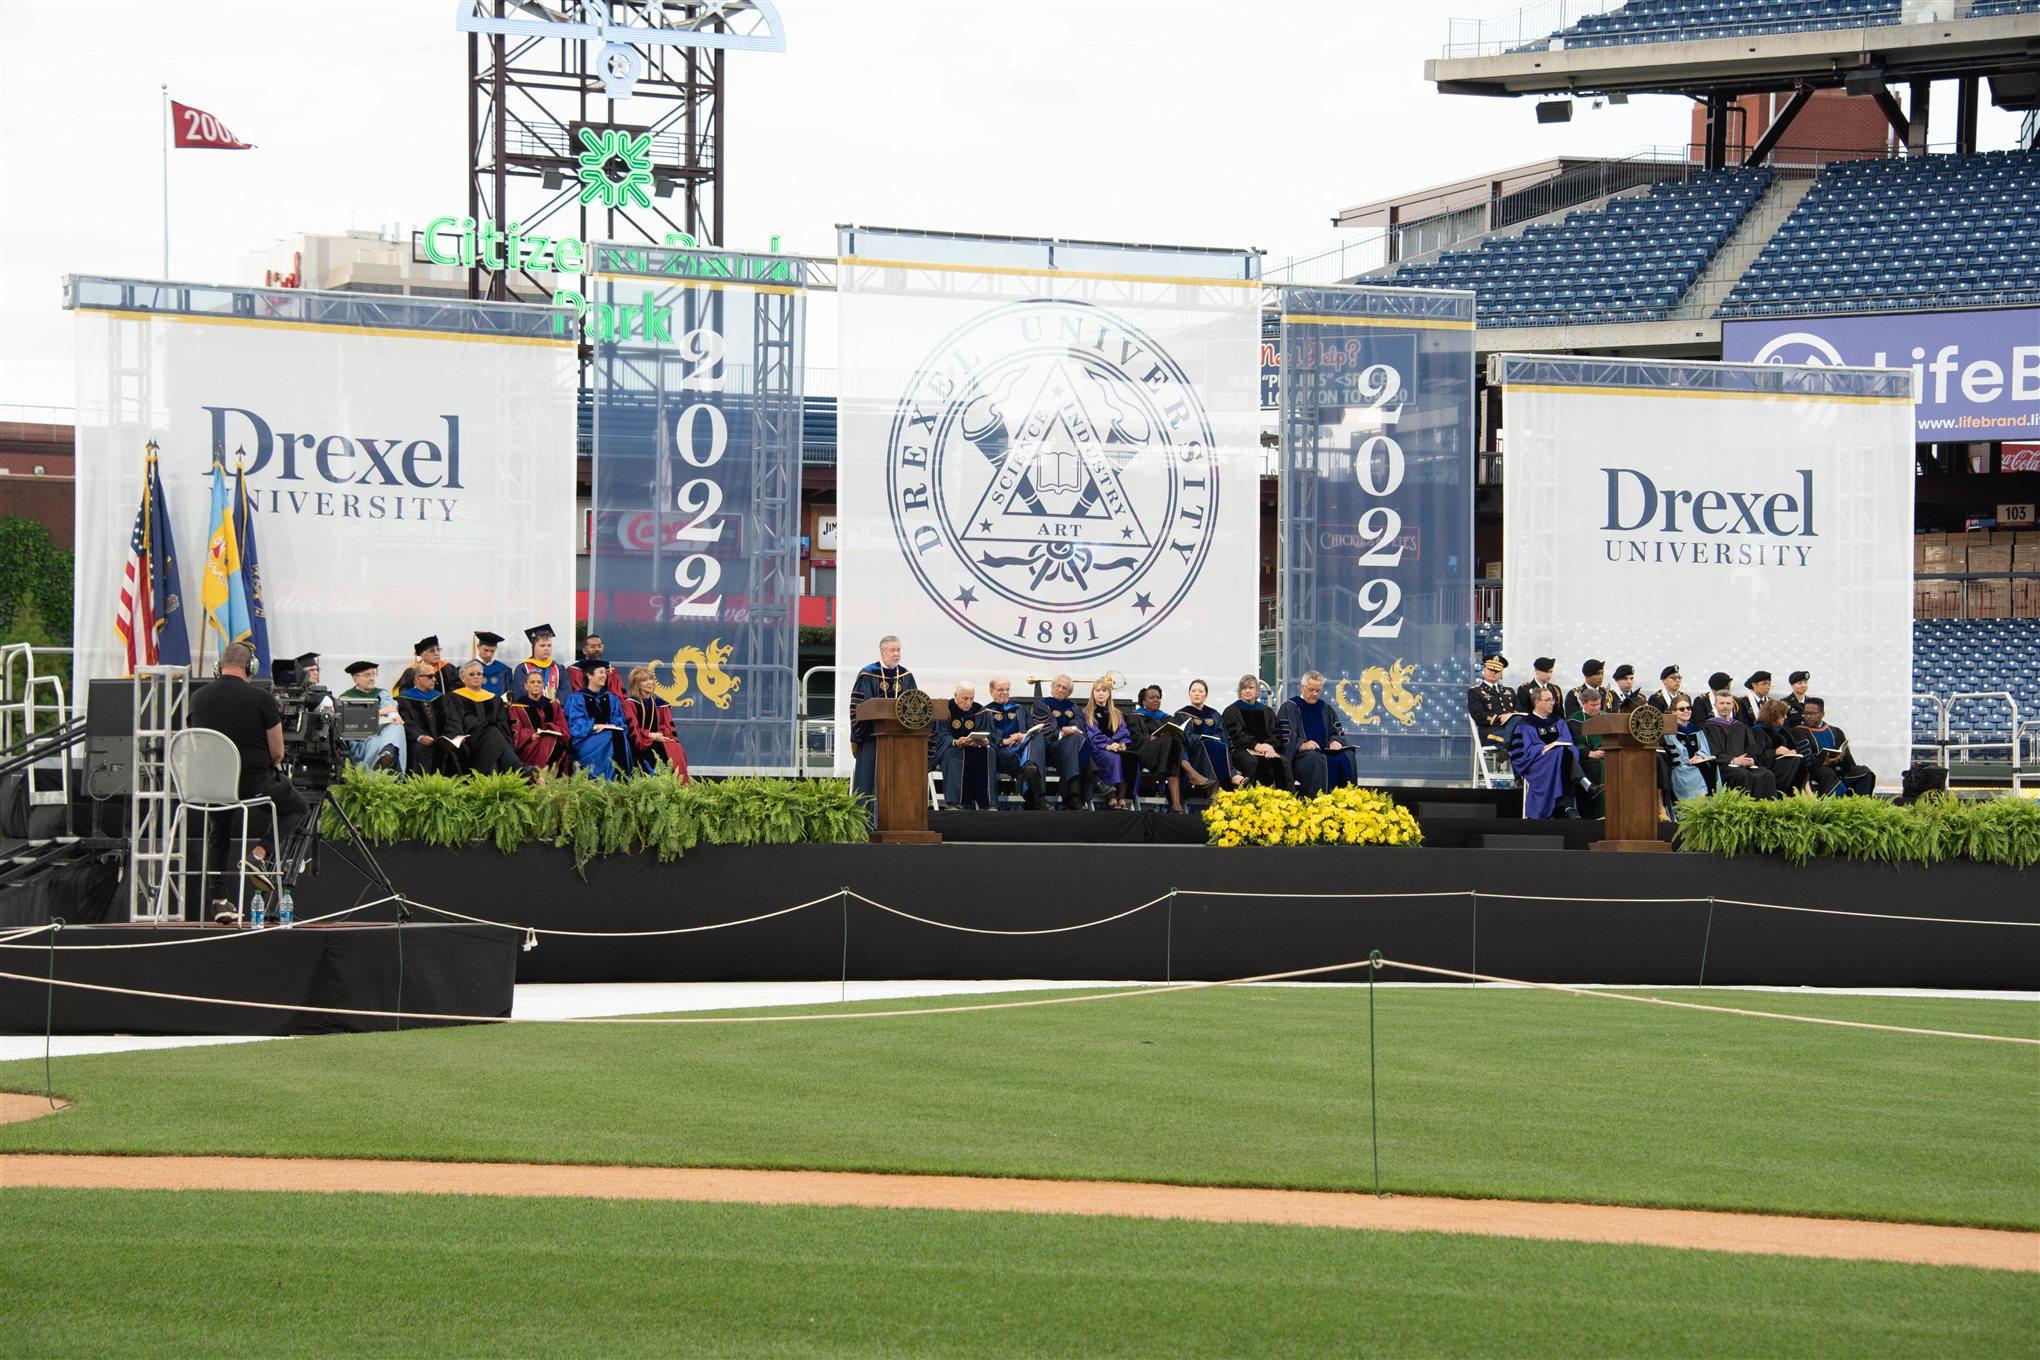 Drexel President John Fry on stage at Drexel&#39;s 2022 Commencement at Citizens Bank Park. Photo credit: Kelly &amp; Massa Photography.